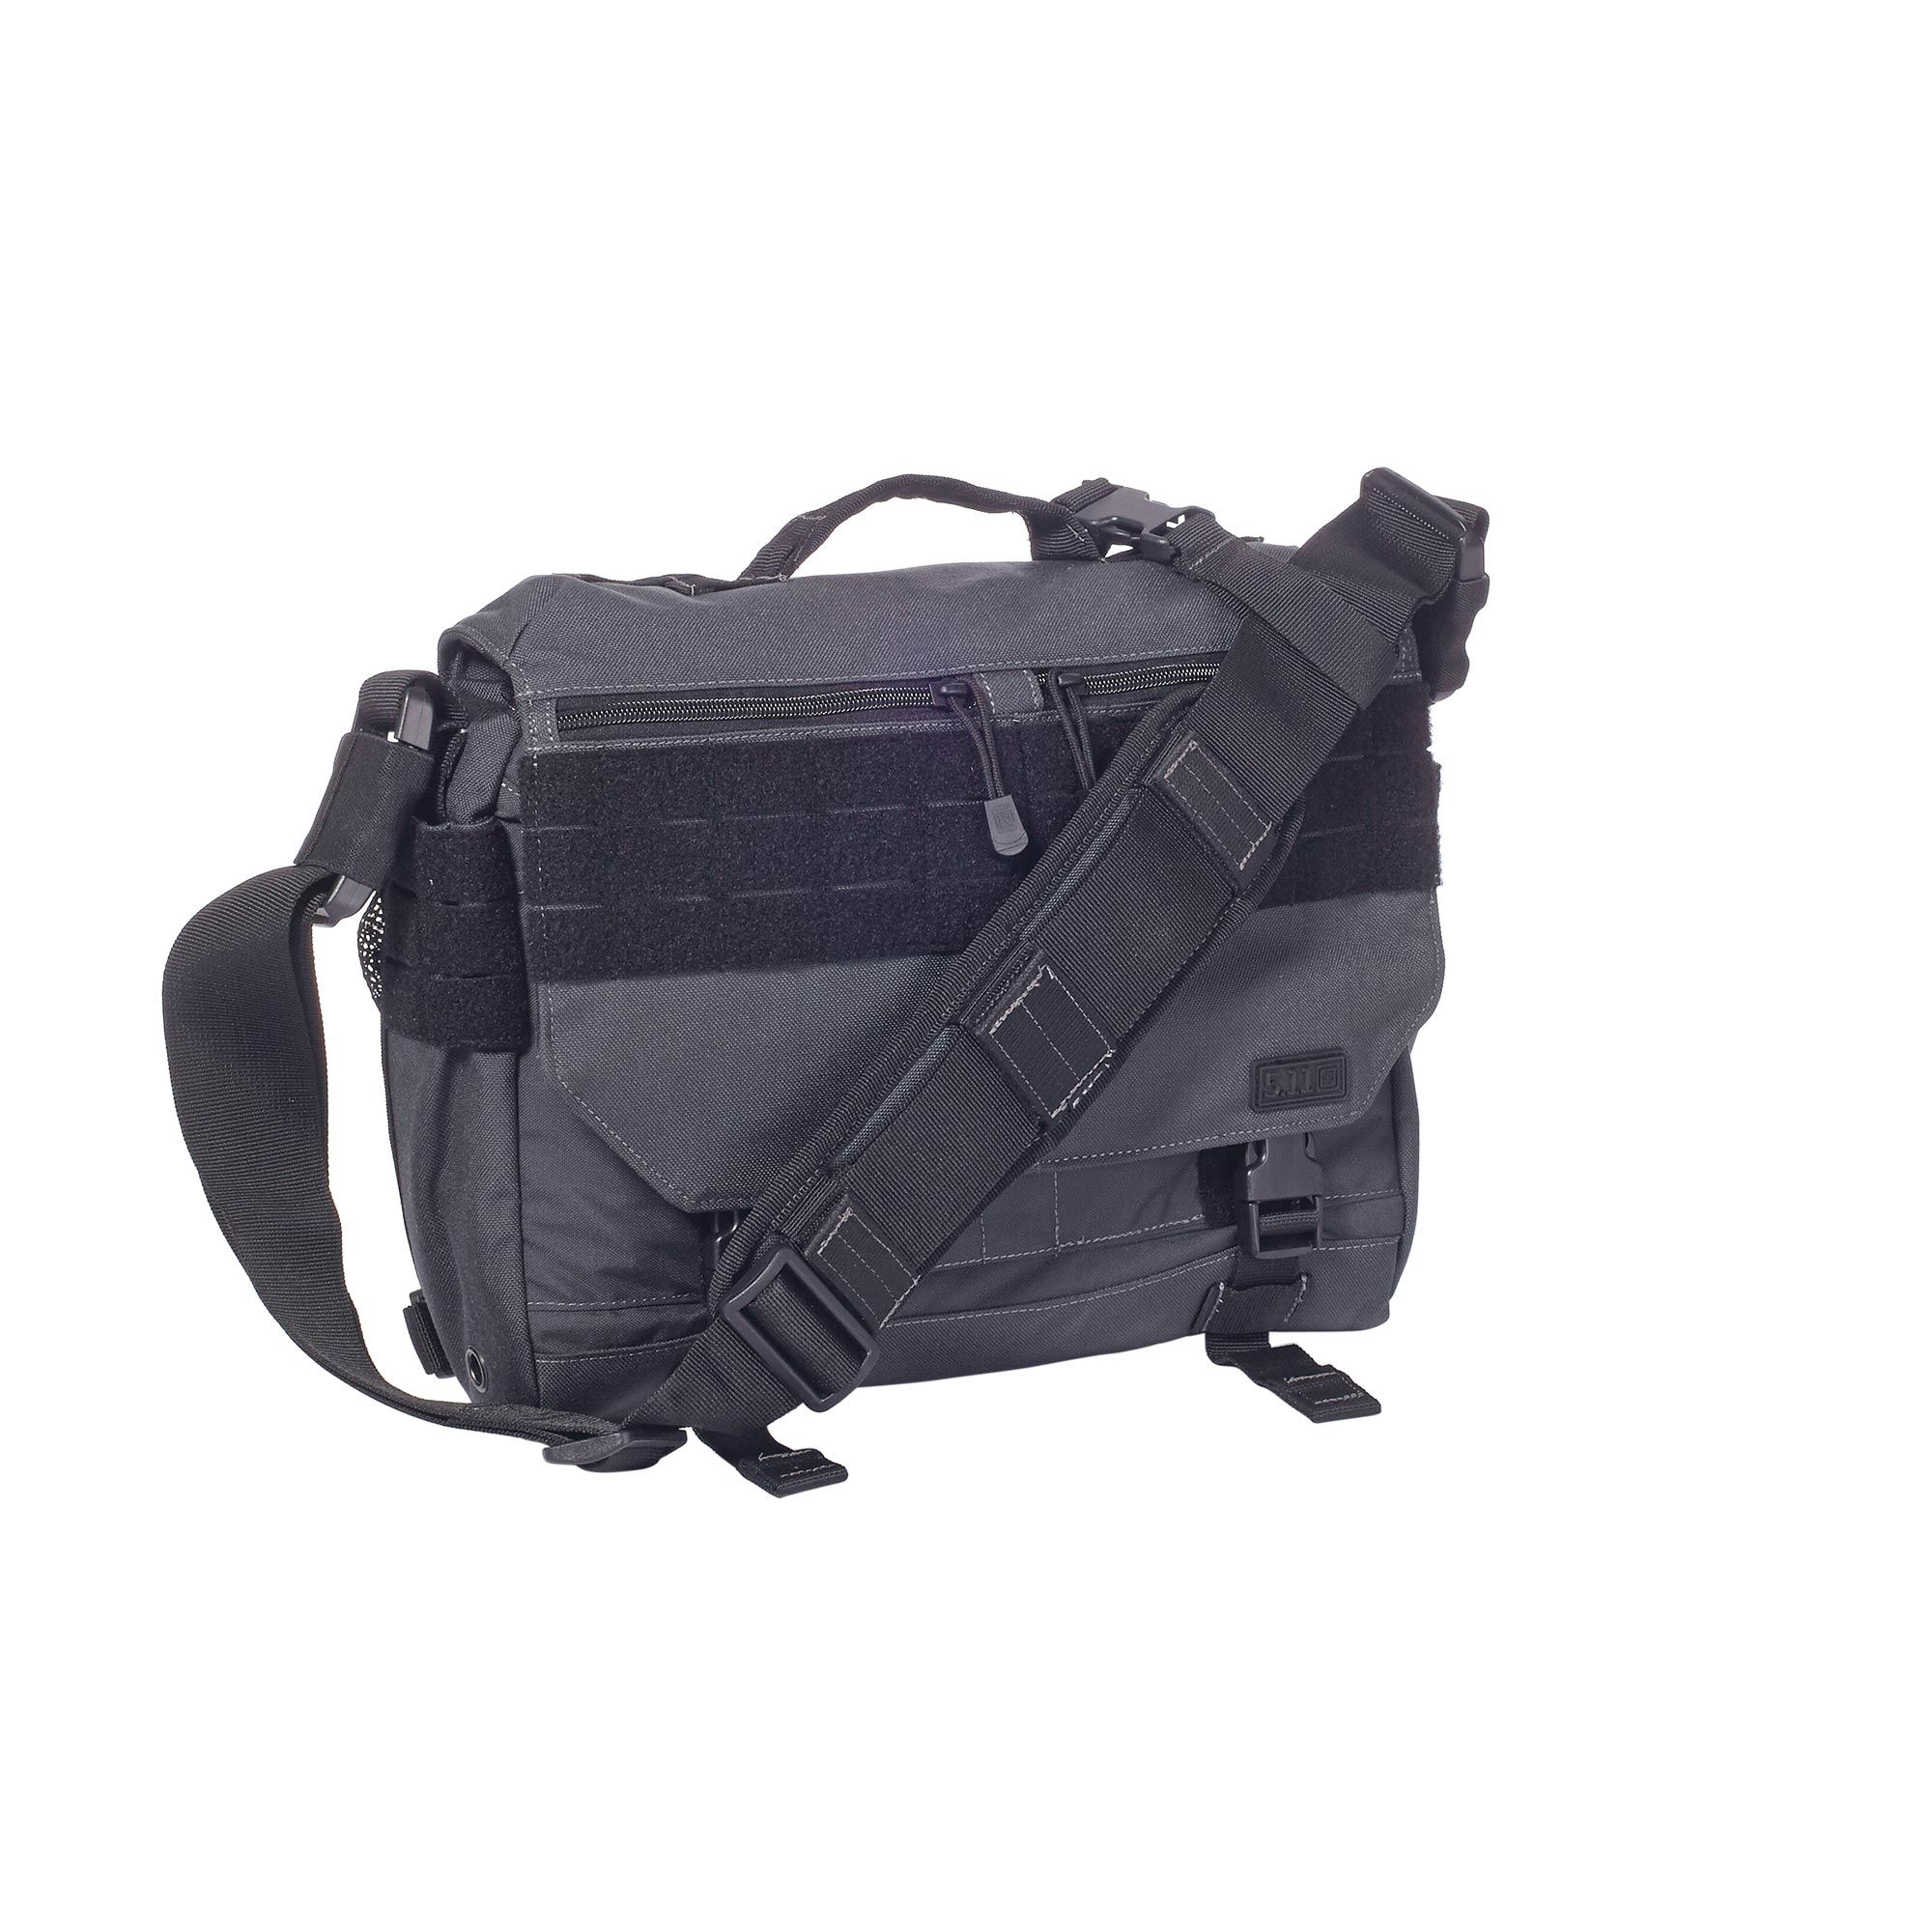 A 1 5 11 d 11. Сумка 5.11 Tactical Rush delivery. Сумка тактическая 5.11 Tactical. Сумка 5.11 Tactical Mike. Сумка 5.11 Tactical тактическая Повседневная 5.11 Rush delivery Mike..